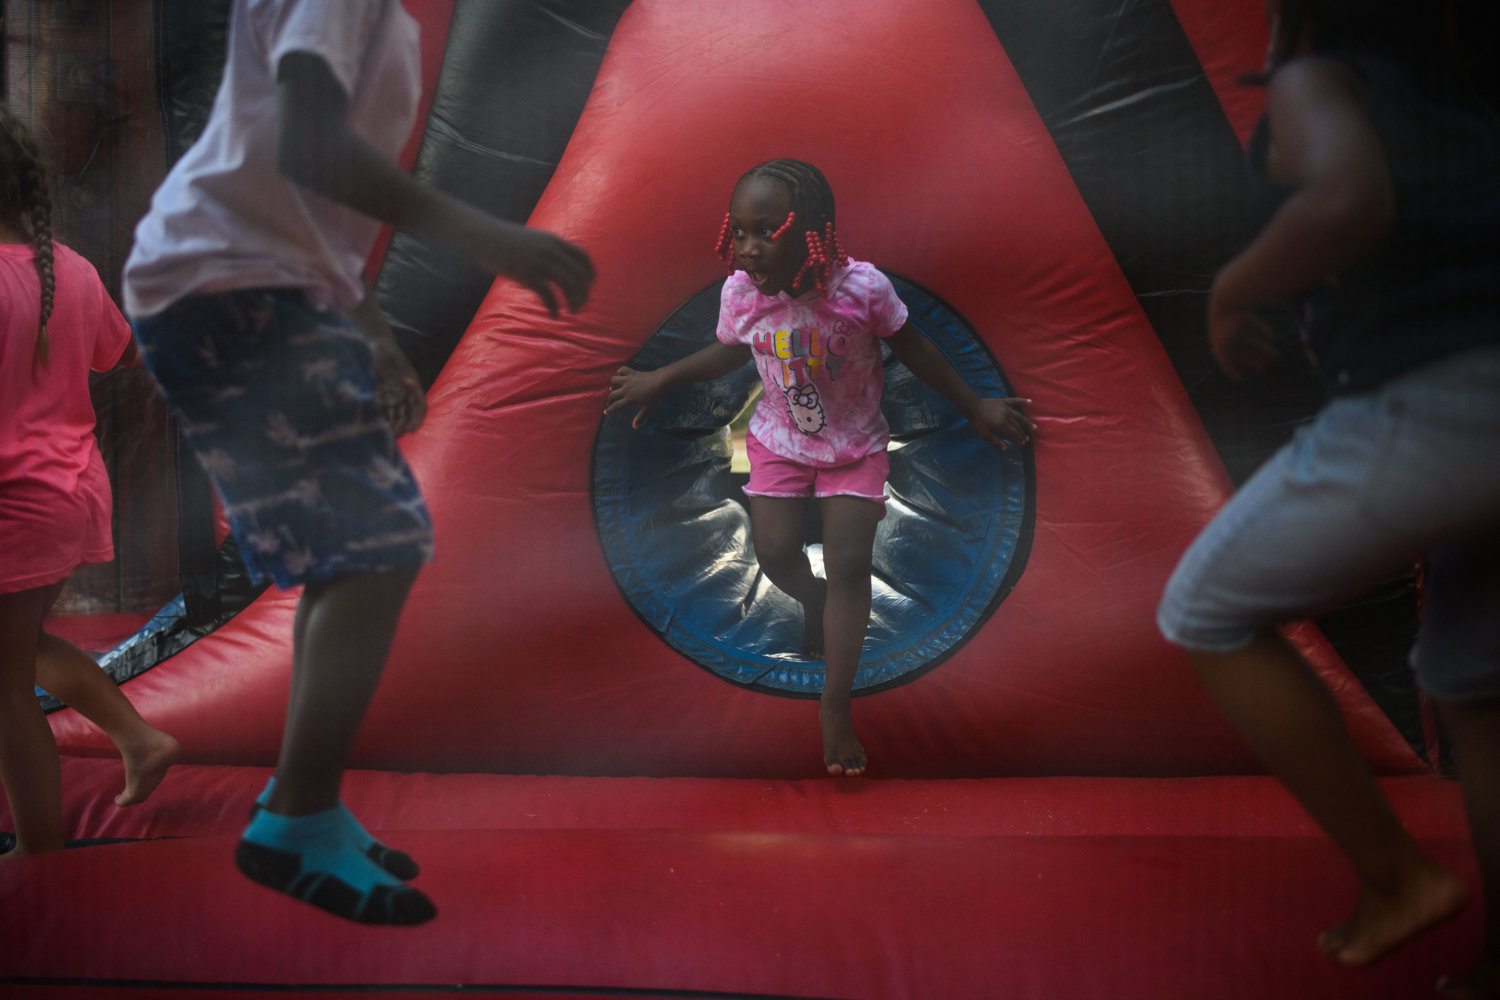 Kids play in a bounce house during the Independence Day celebration in Festival Park on Monday.